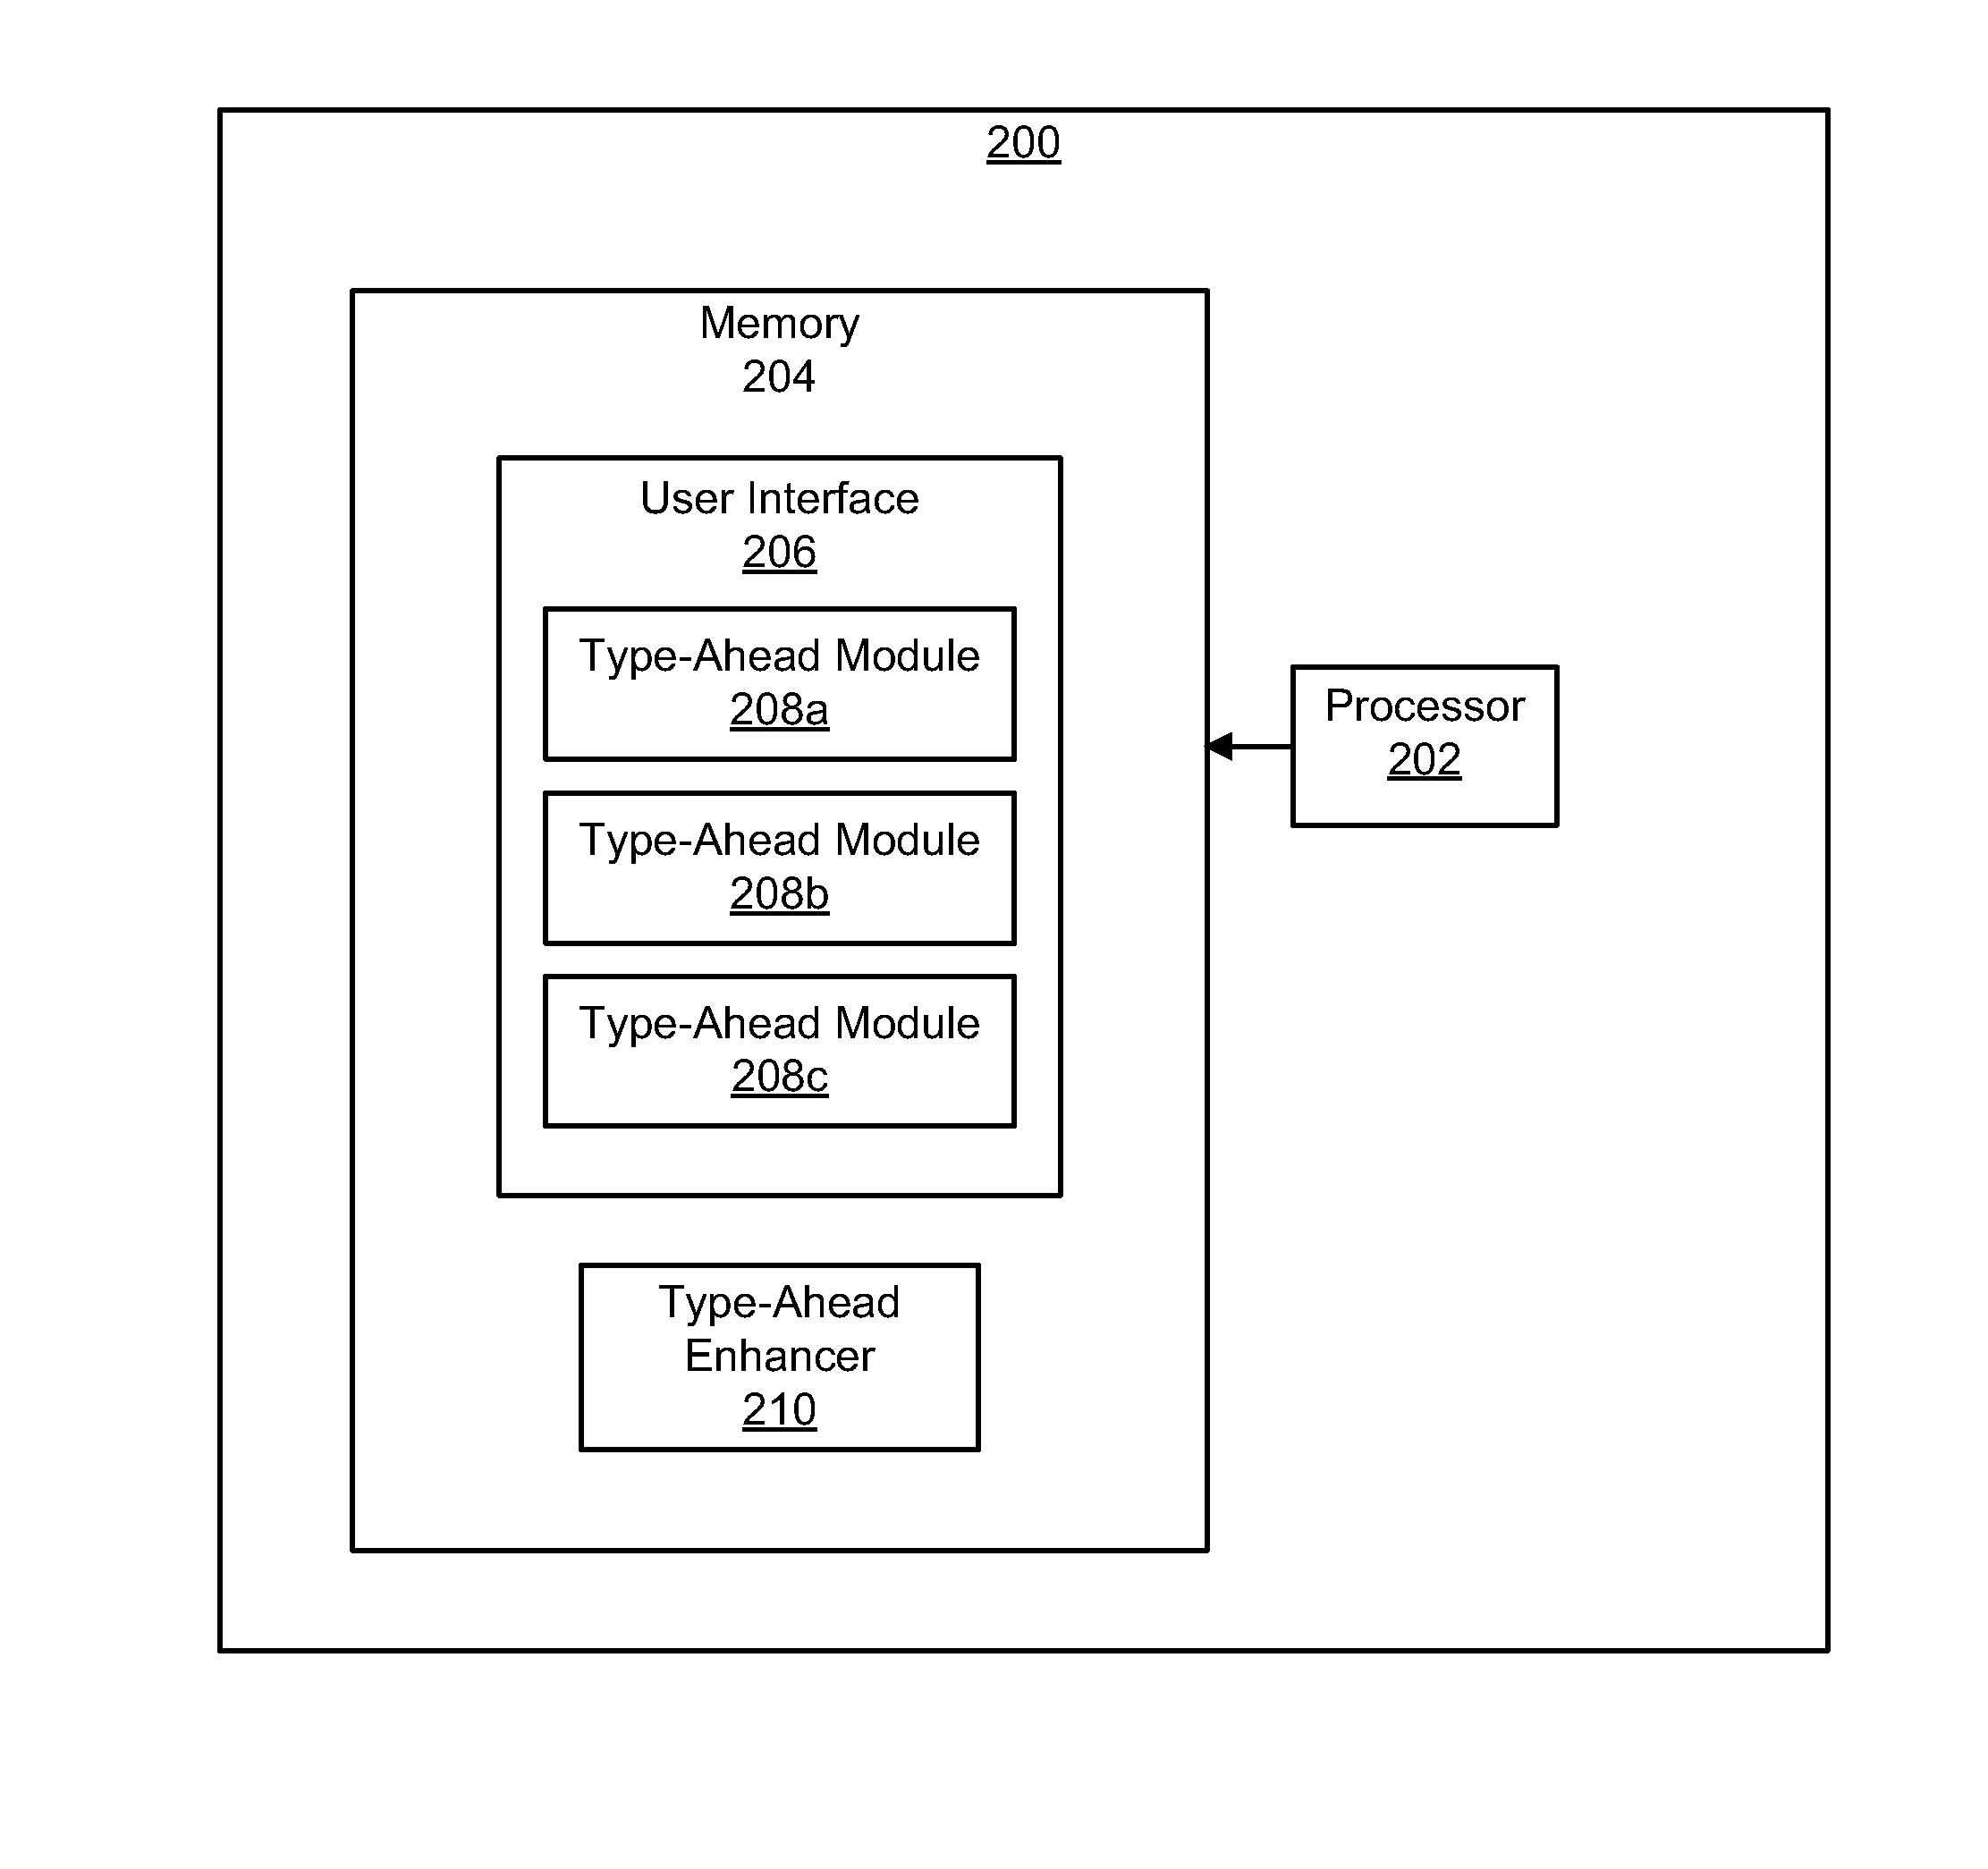 Apparatus, system, and method for improved type-ahead functionality in a type-ahead field based on activity of a user within a user interface